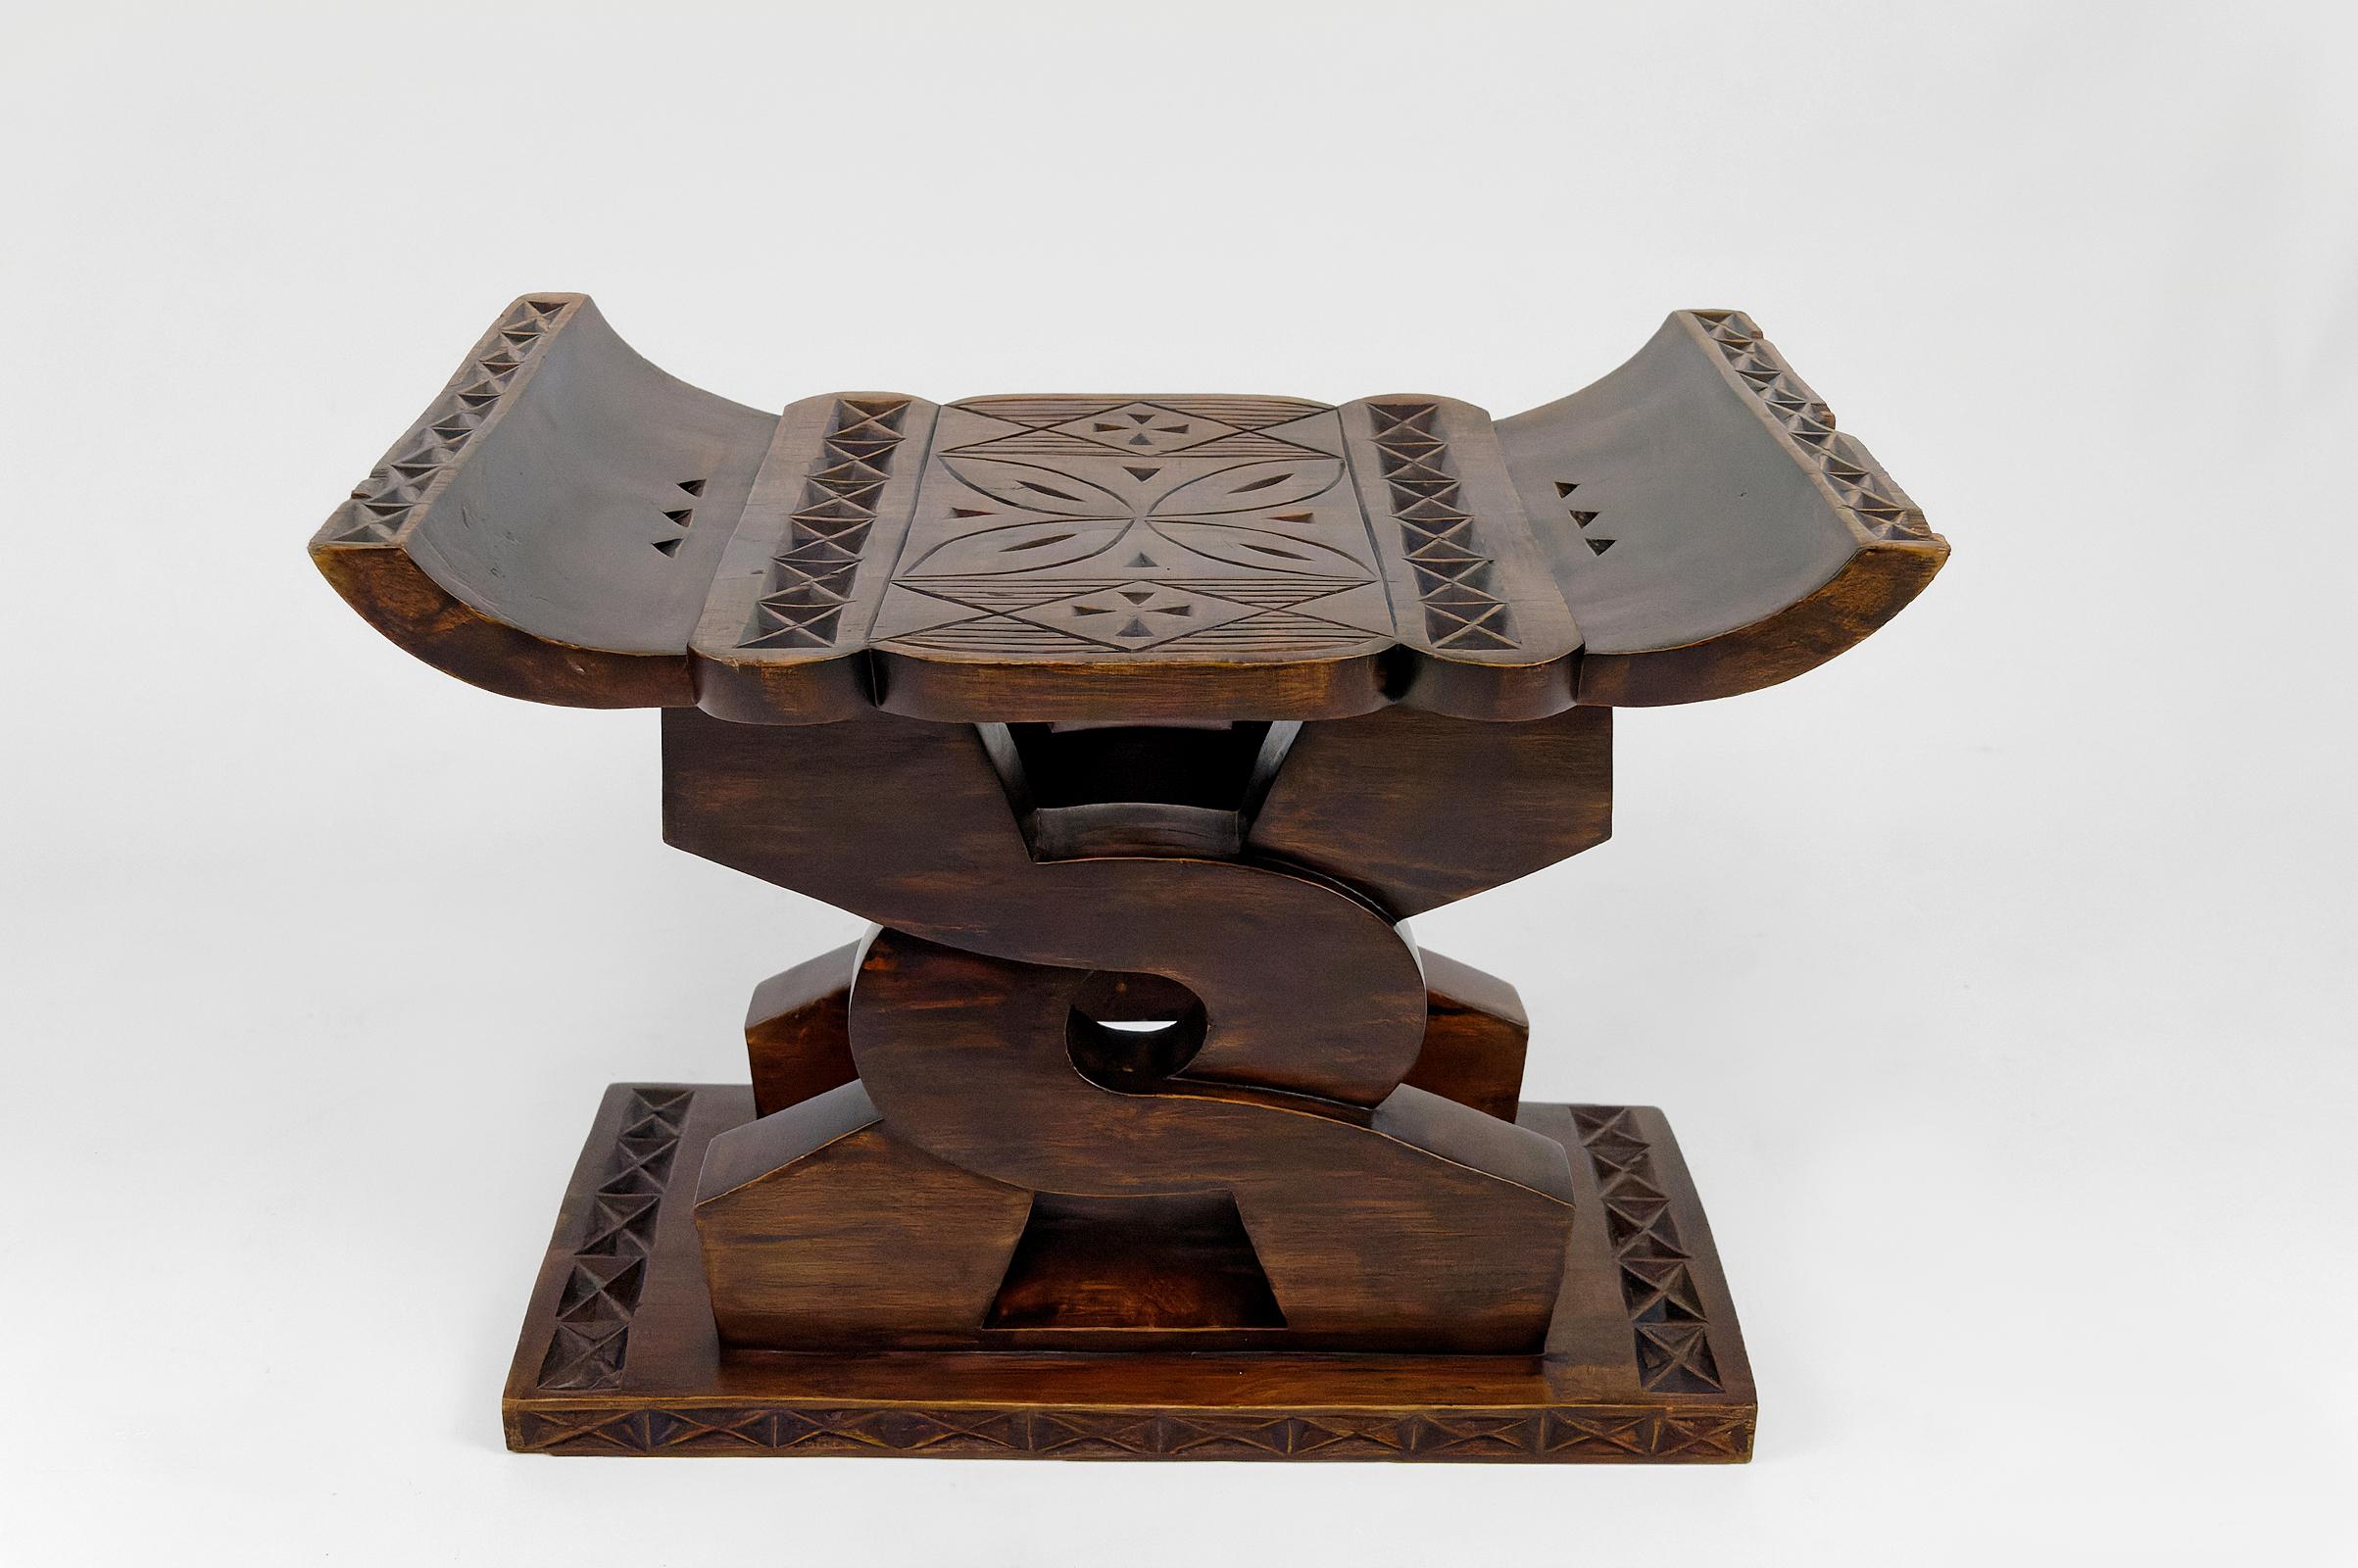 In cedar wood.

An African carved wooden stool having a curved seat raised on two intertwined carved wooden supports with a thin plinth base. Ghanaian tradition explains that the central symbol carved into this cedar stool is a knot of wisdom. Only